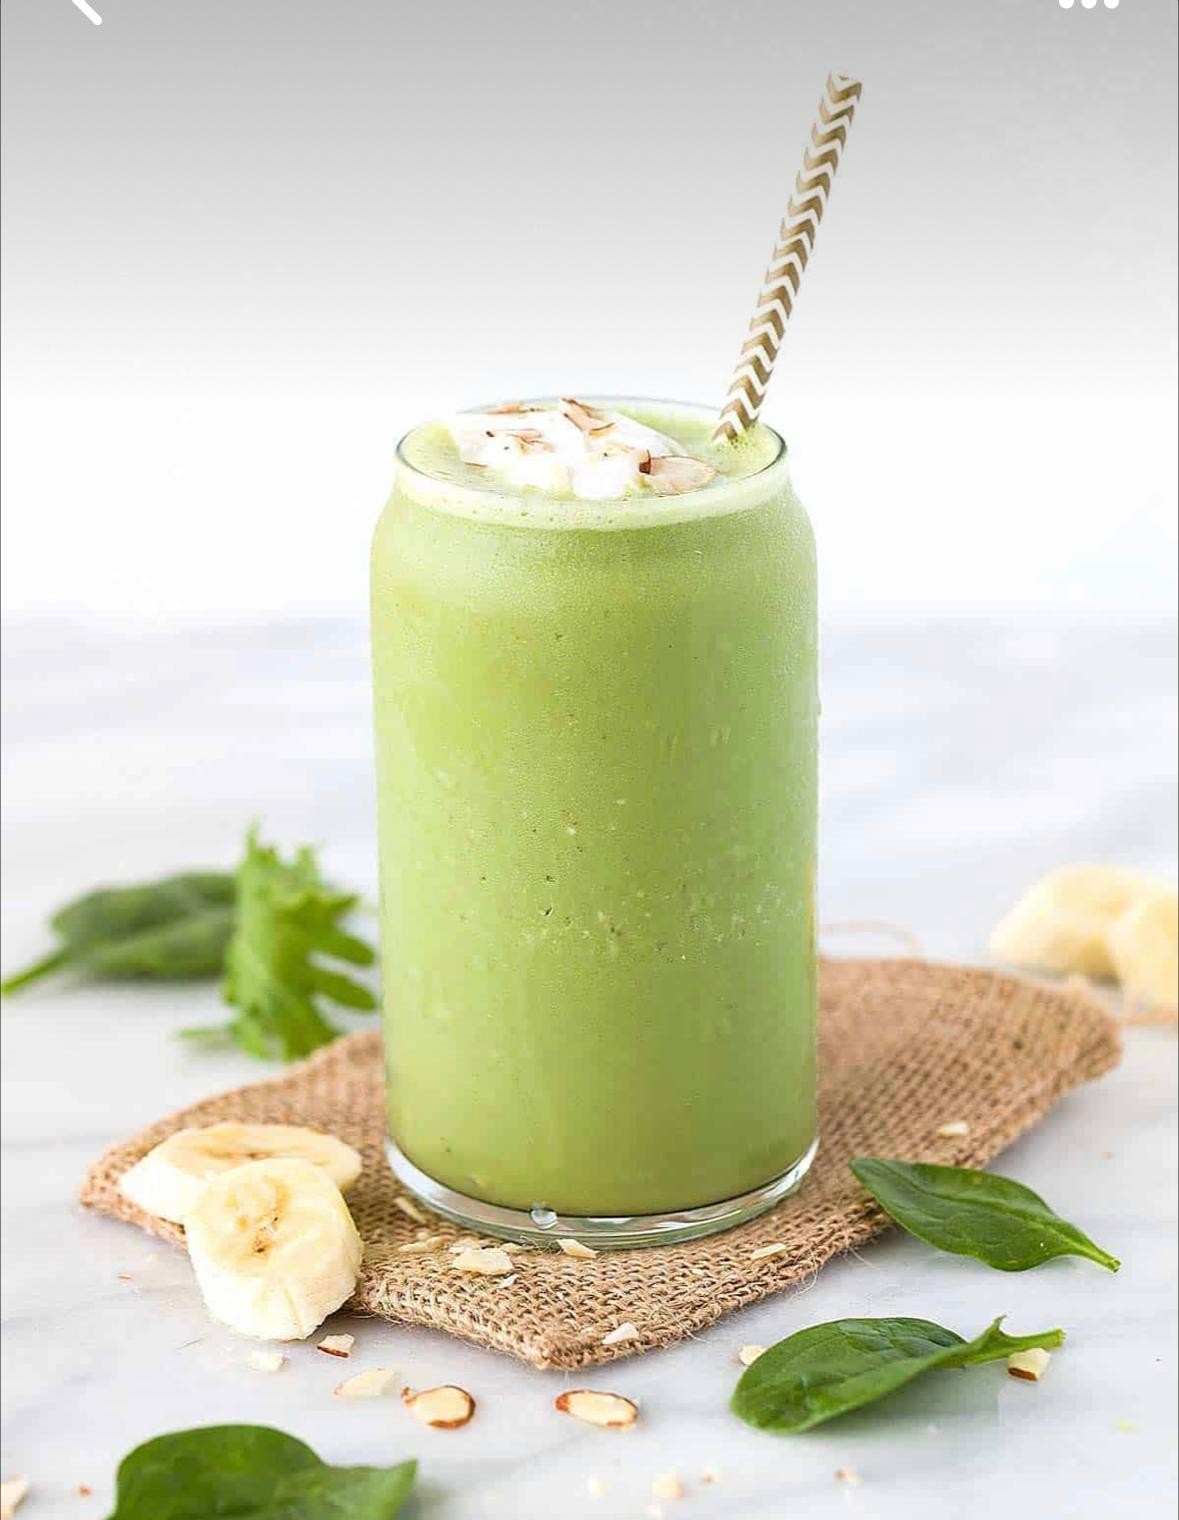 Leaf Protein (Coconut Milk, Banana, Spinach, Matcha, Flax Seeds, Bee Pollen, Honey, Plant Protein)